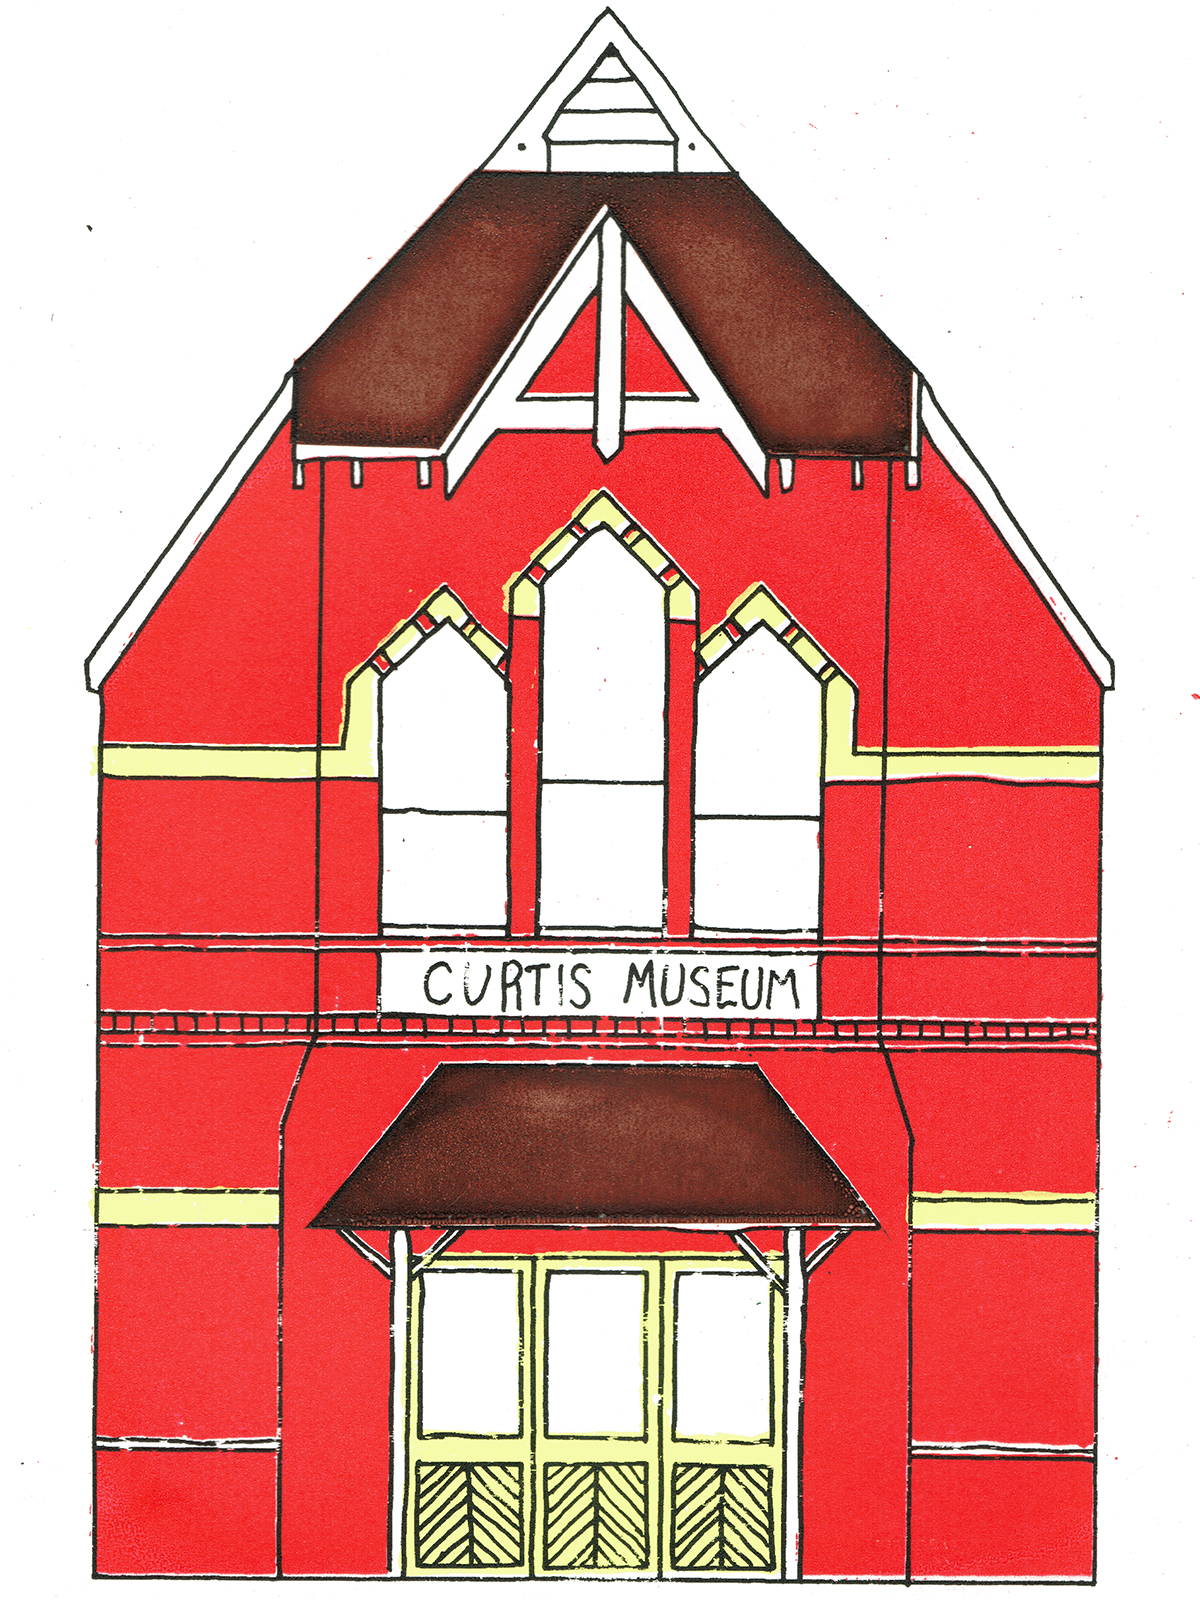 Screen Print of the Curtis Museum